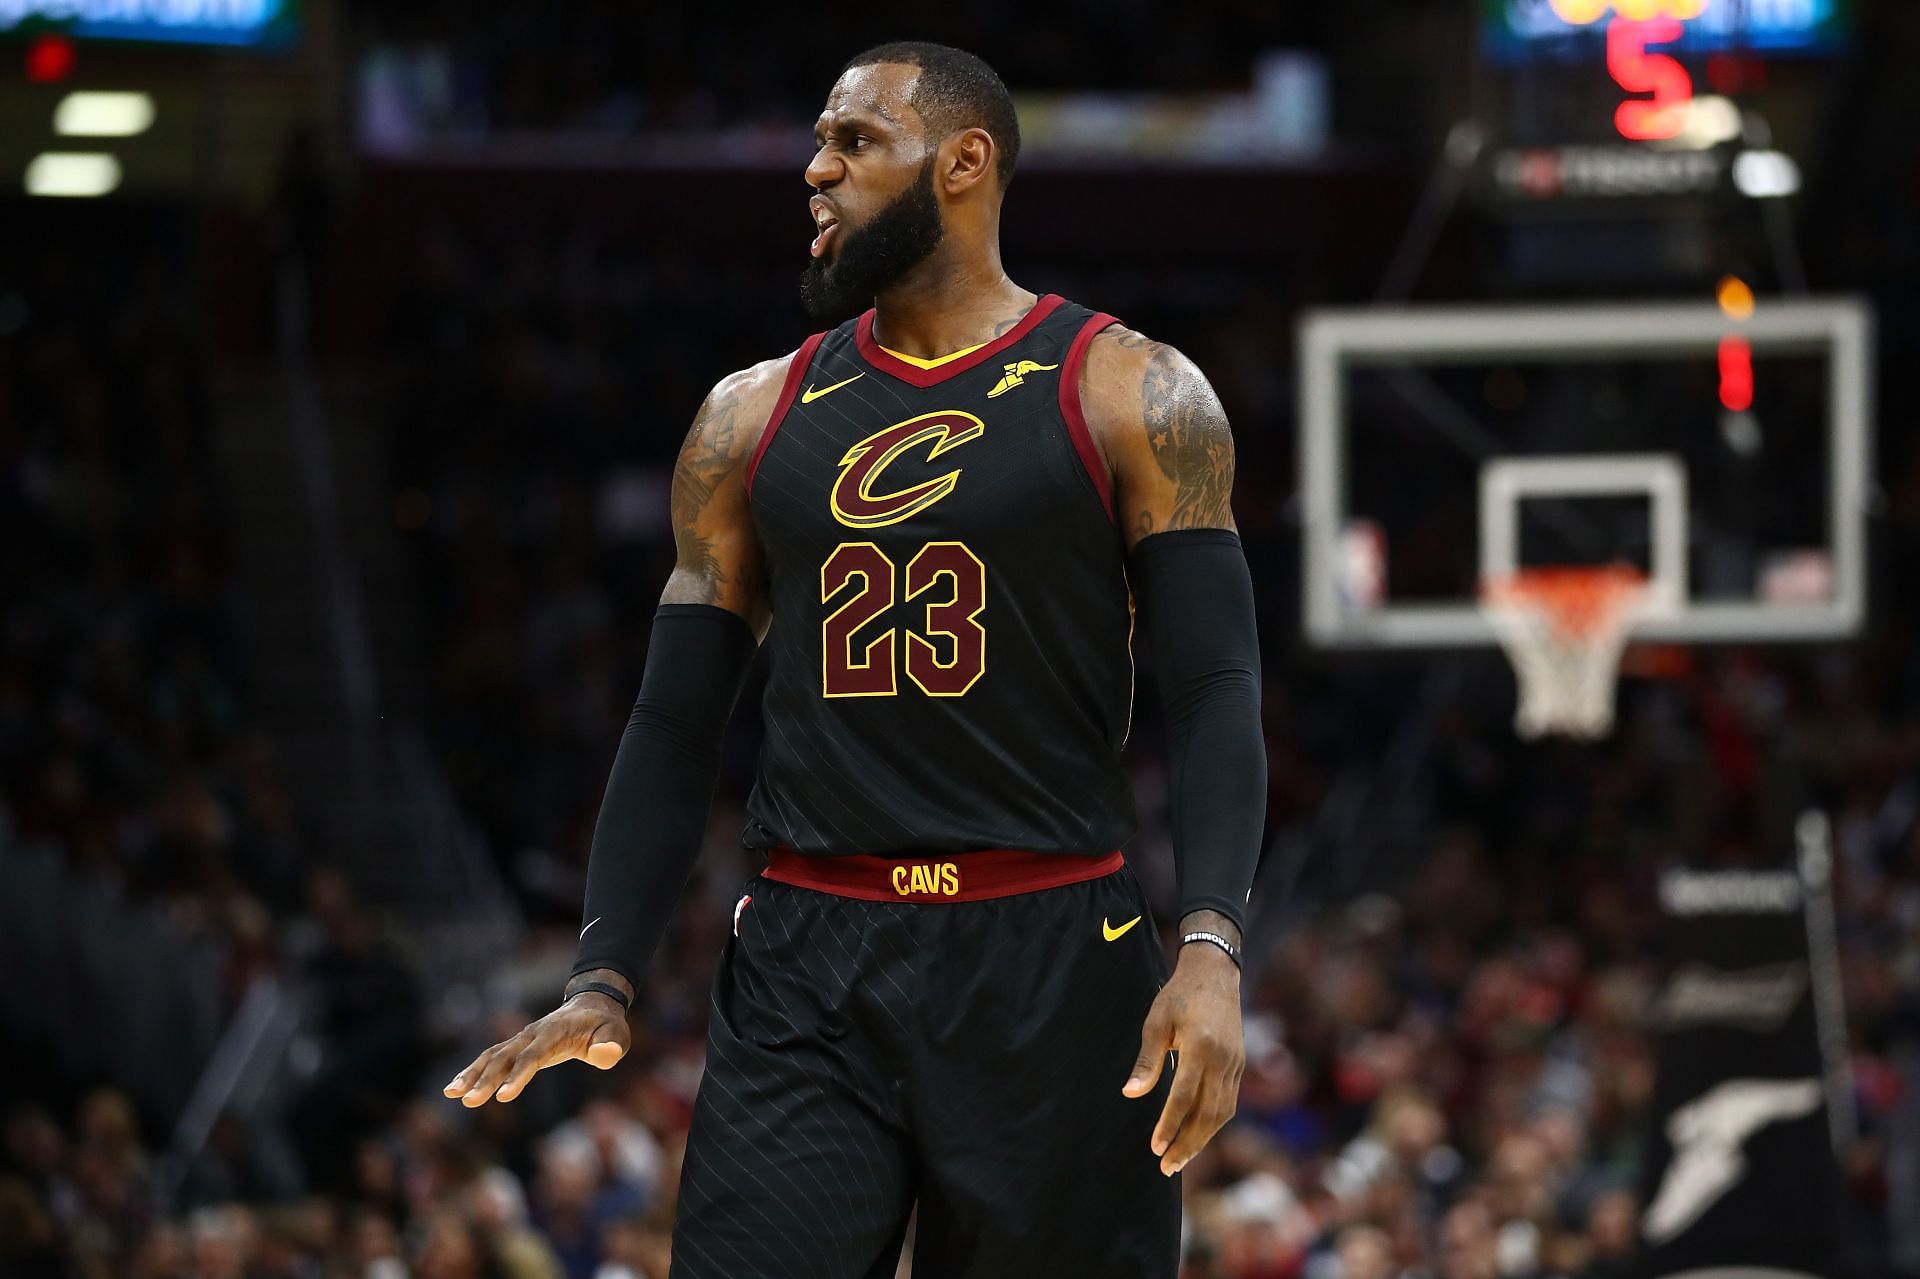 LeBron James and the Cleveland Cavaliers hosted the Chicago Bulls in a 115-112 win at Quicken Loans Arena on December 21, 2017.